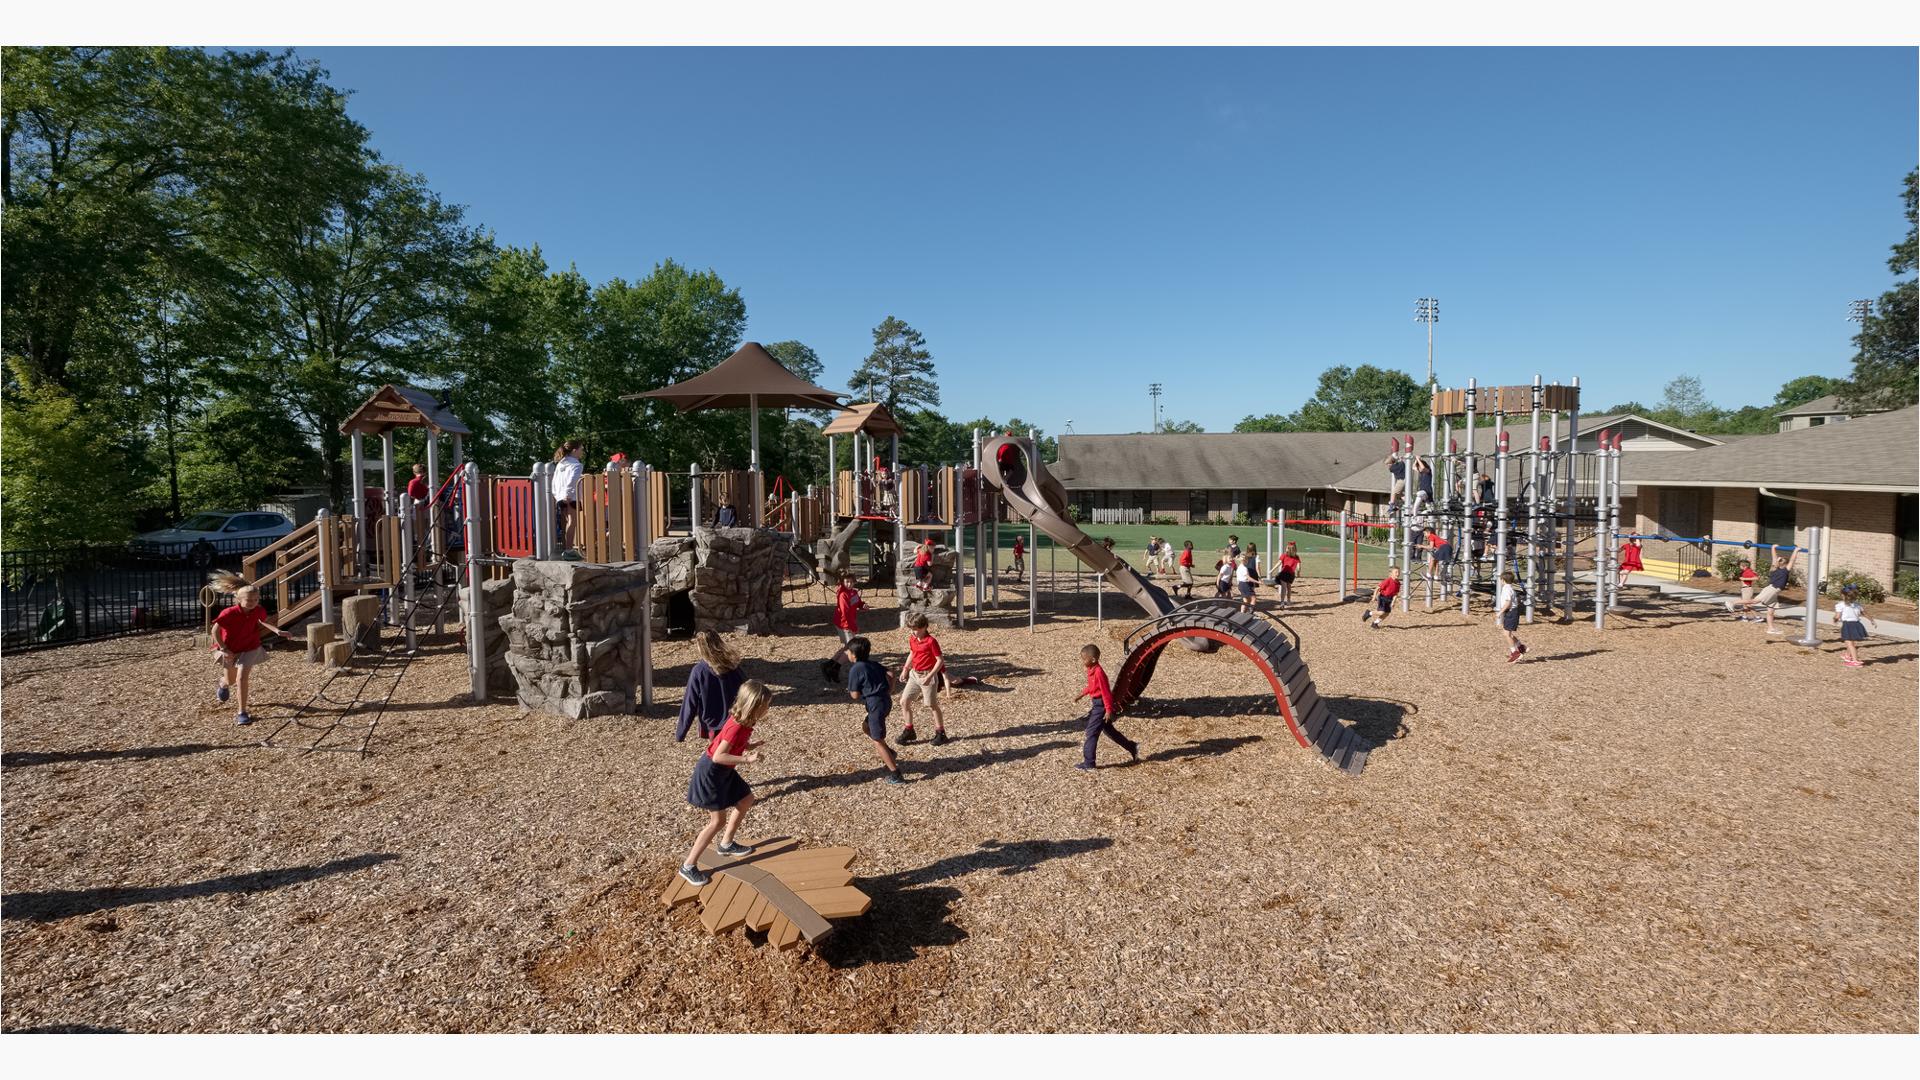 Children at Hammond School playing on this nature-inspired playground. The PlayBooster play structure is packed with kids, while the Netplex is overrun with active kids.